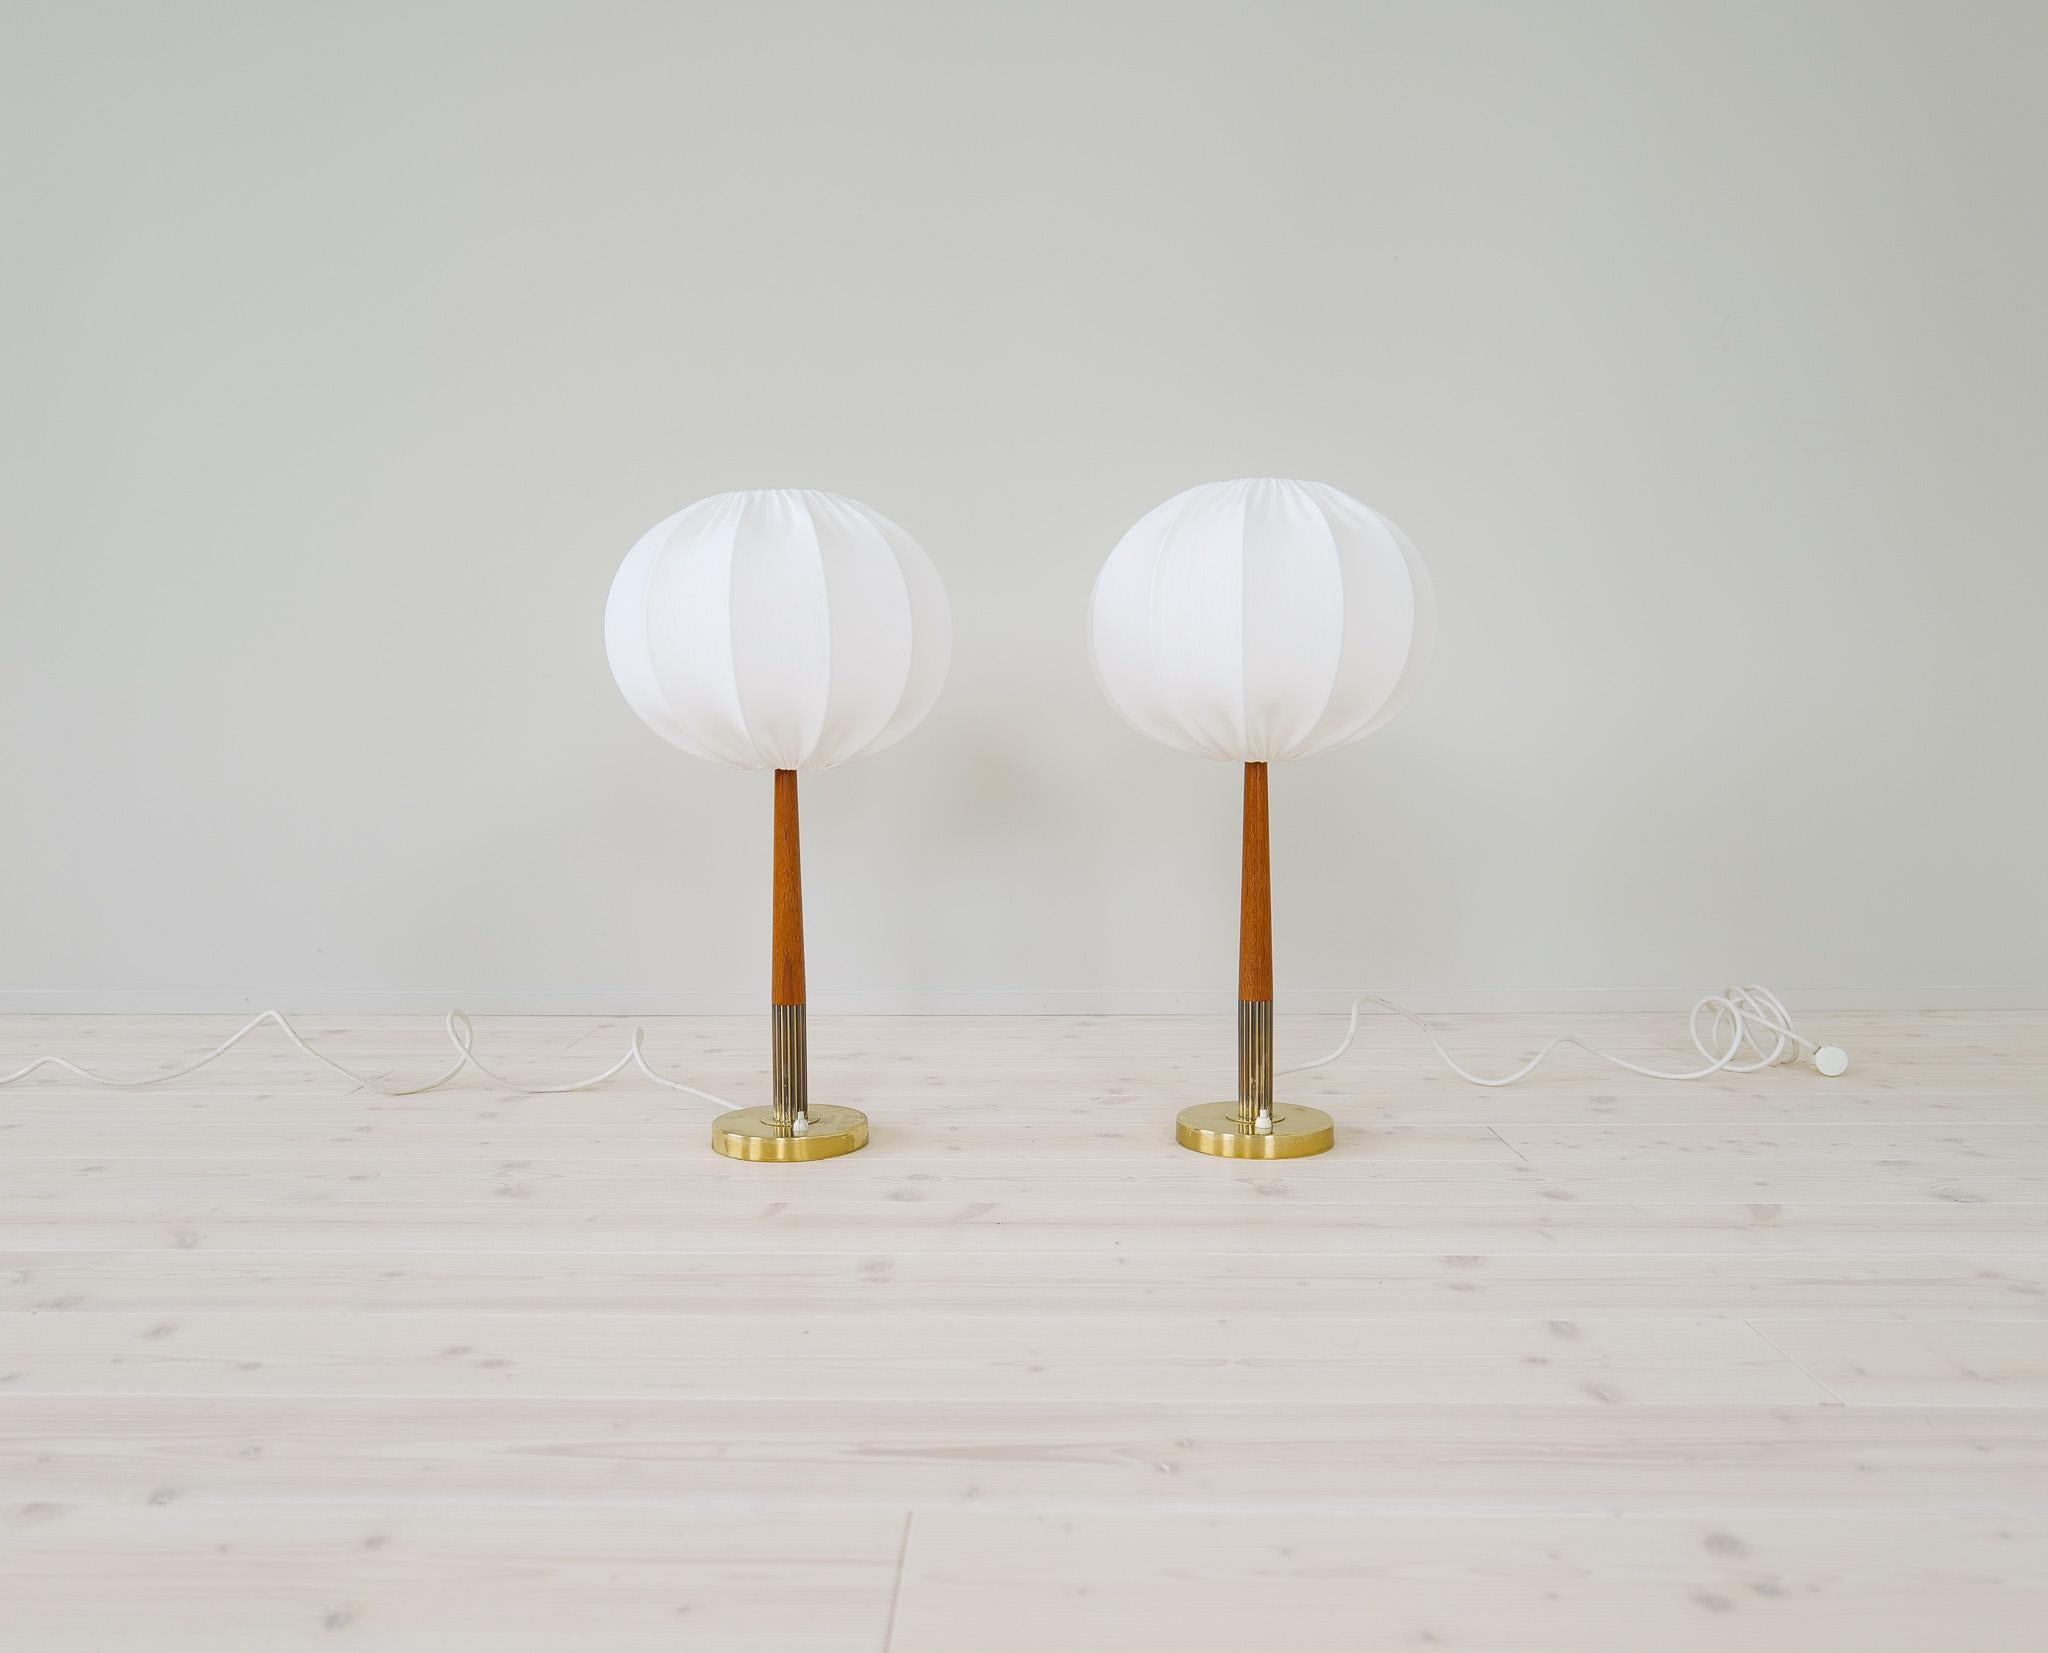 Wonderful table lamps in brass and teak with classic cotton shades by Boréns, Sweden.
These two lamps are a good exampel of high qyality lamps produced in Sweden during the midcentury. Giftet with all new cotton shades this pair of lamps are realy